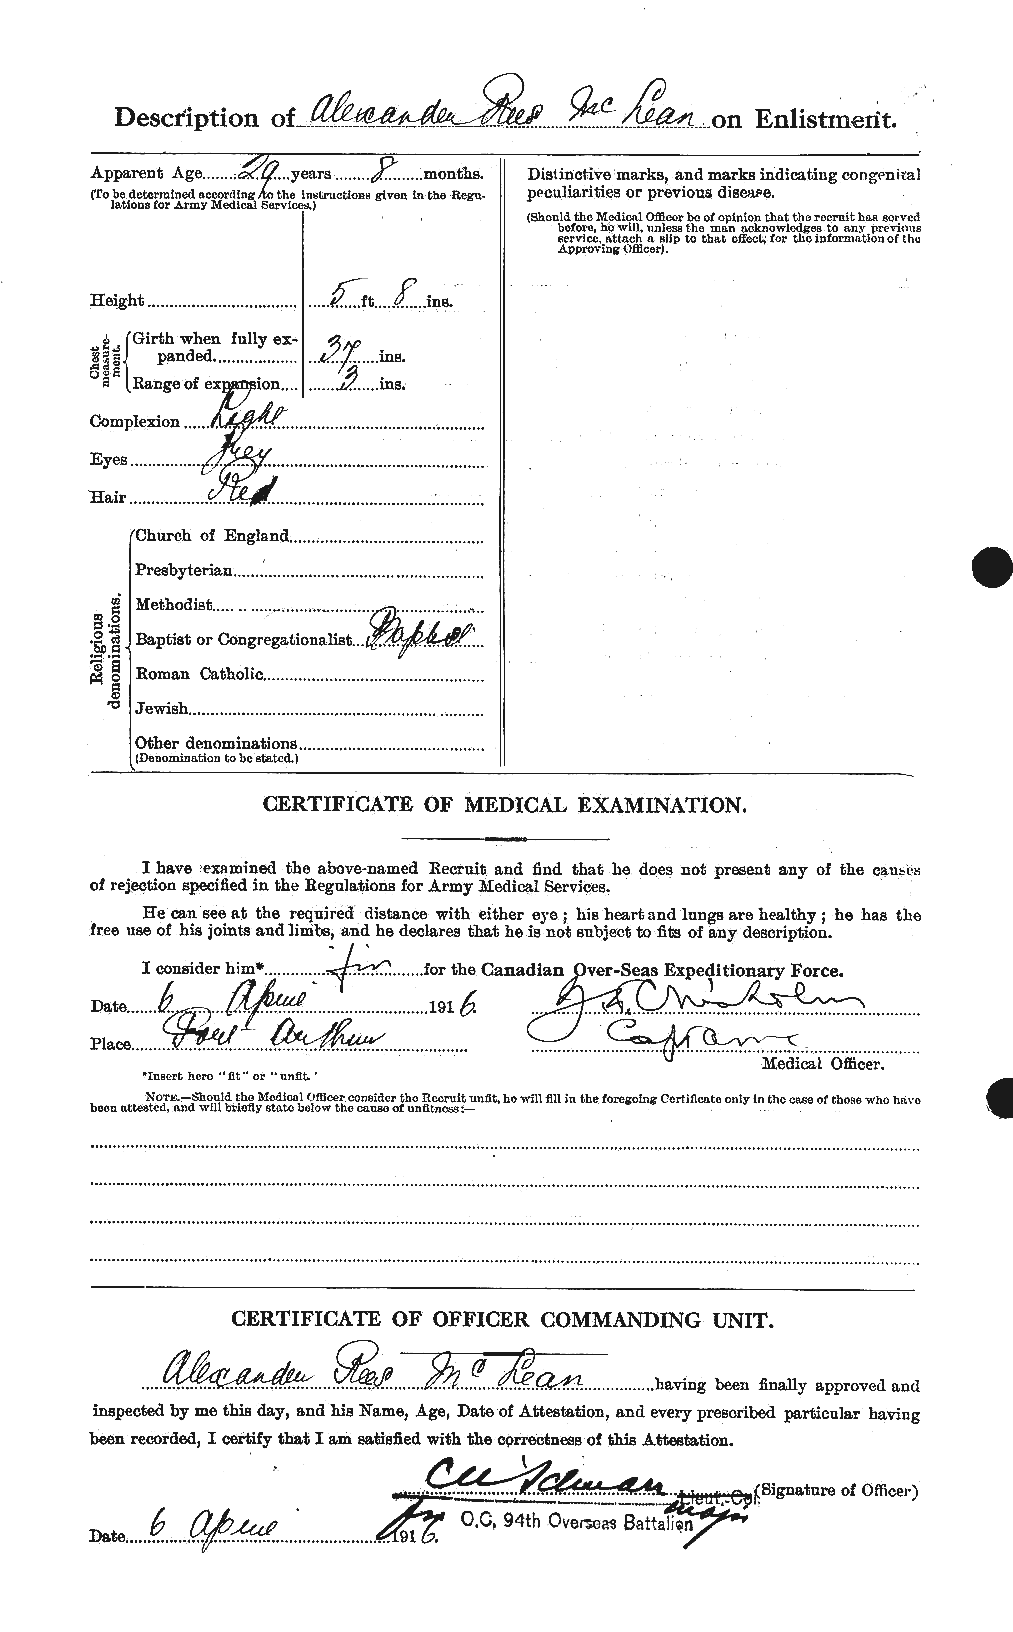 Personnel Records of the First World War - CEF 532766b